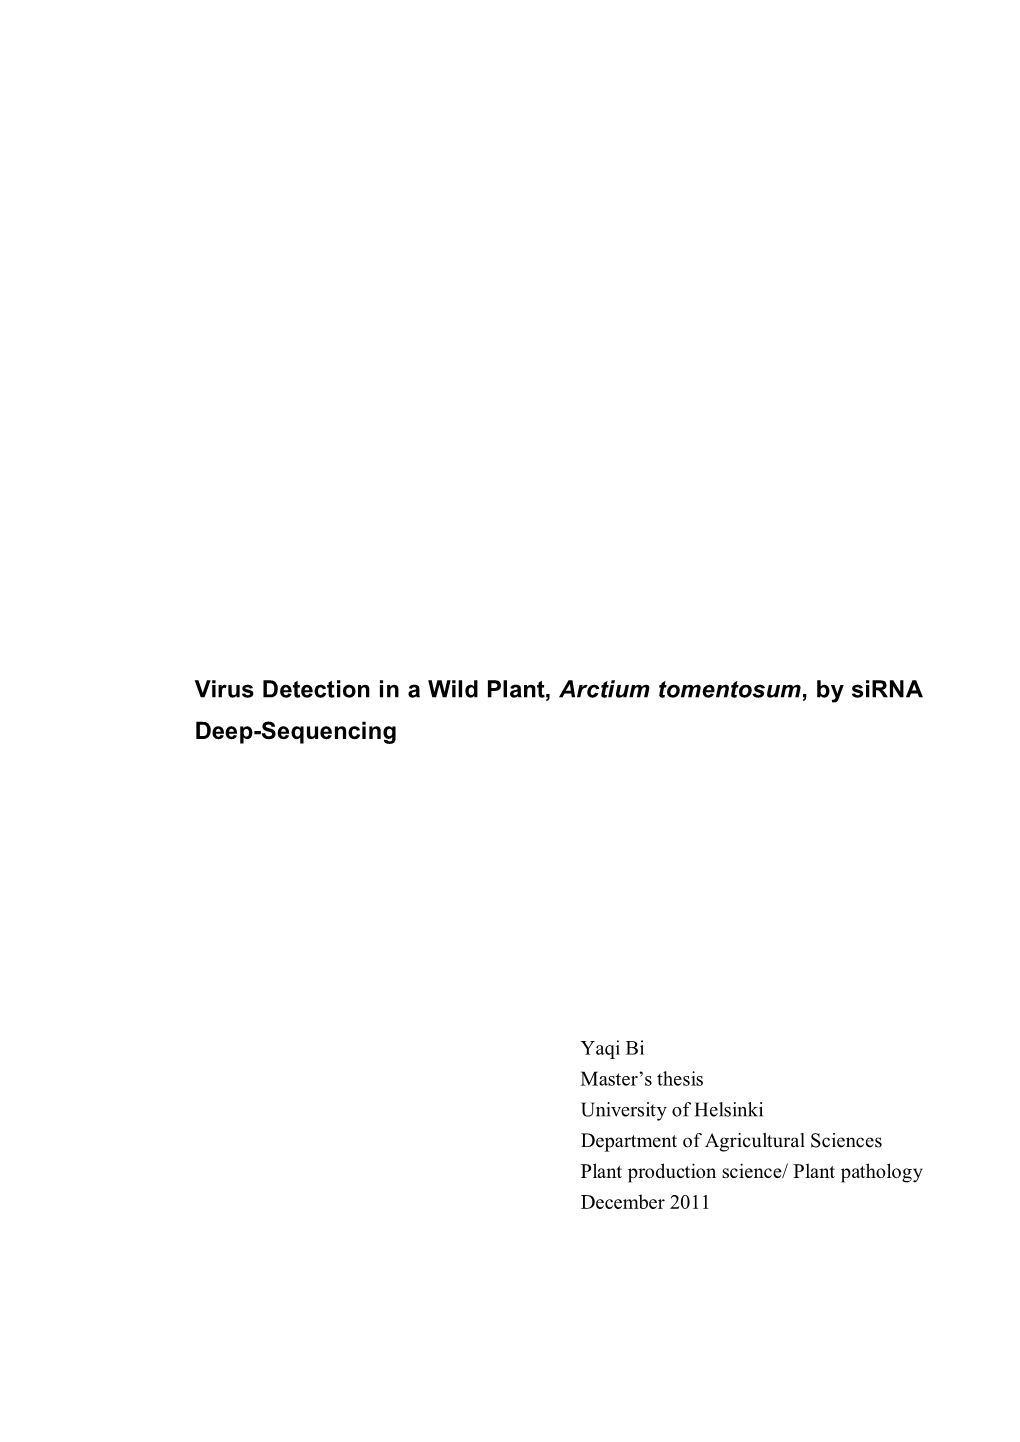 Virus Detection in a Wild Plant, Arctium Tomentosum, by Sirna Deep-Sequencing